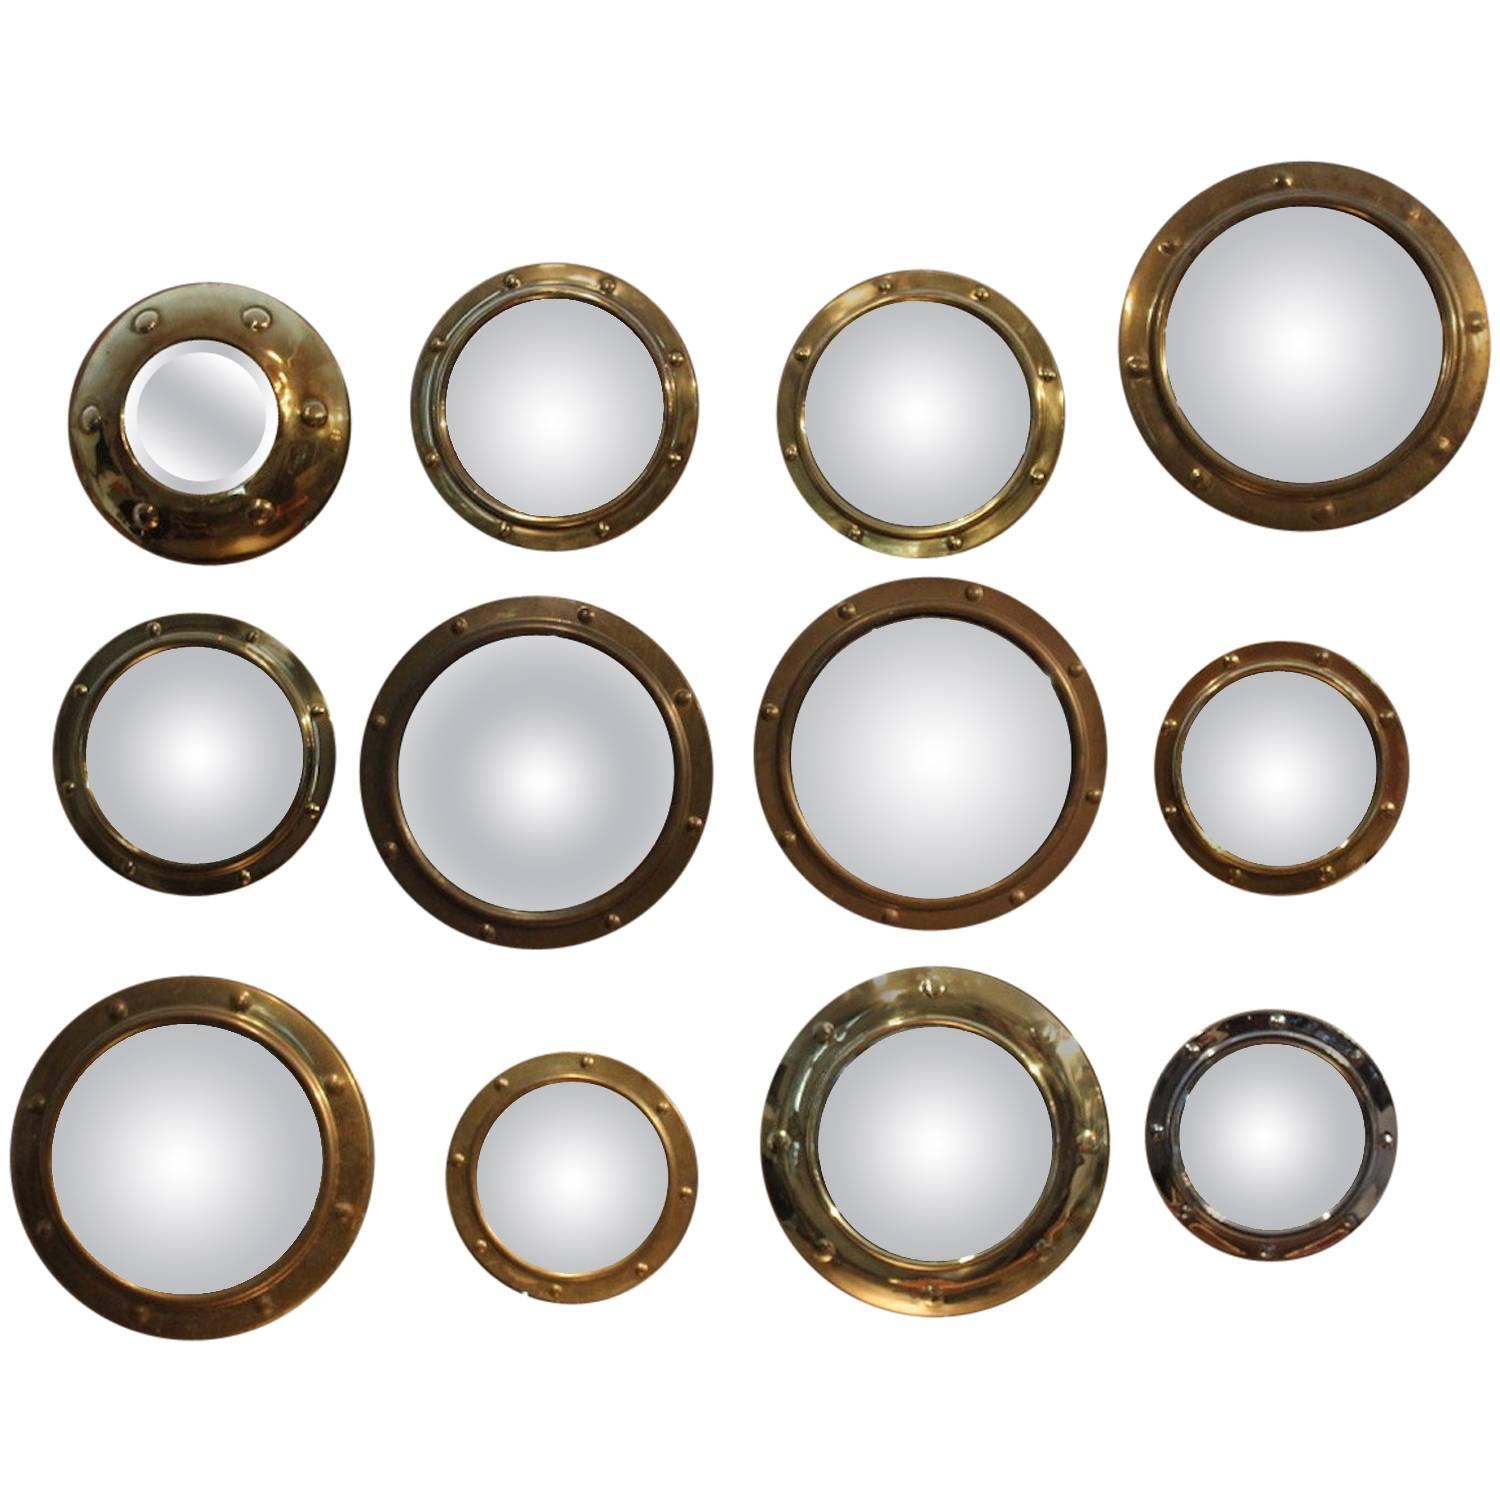 Collection of 12 1930s English Brass Porthole Mirrors